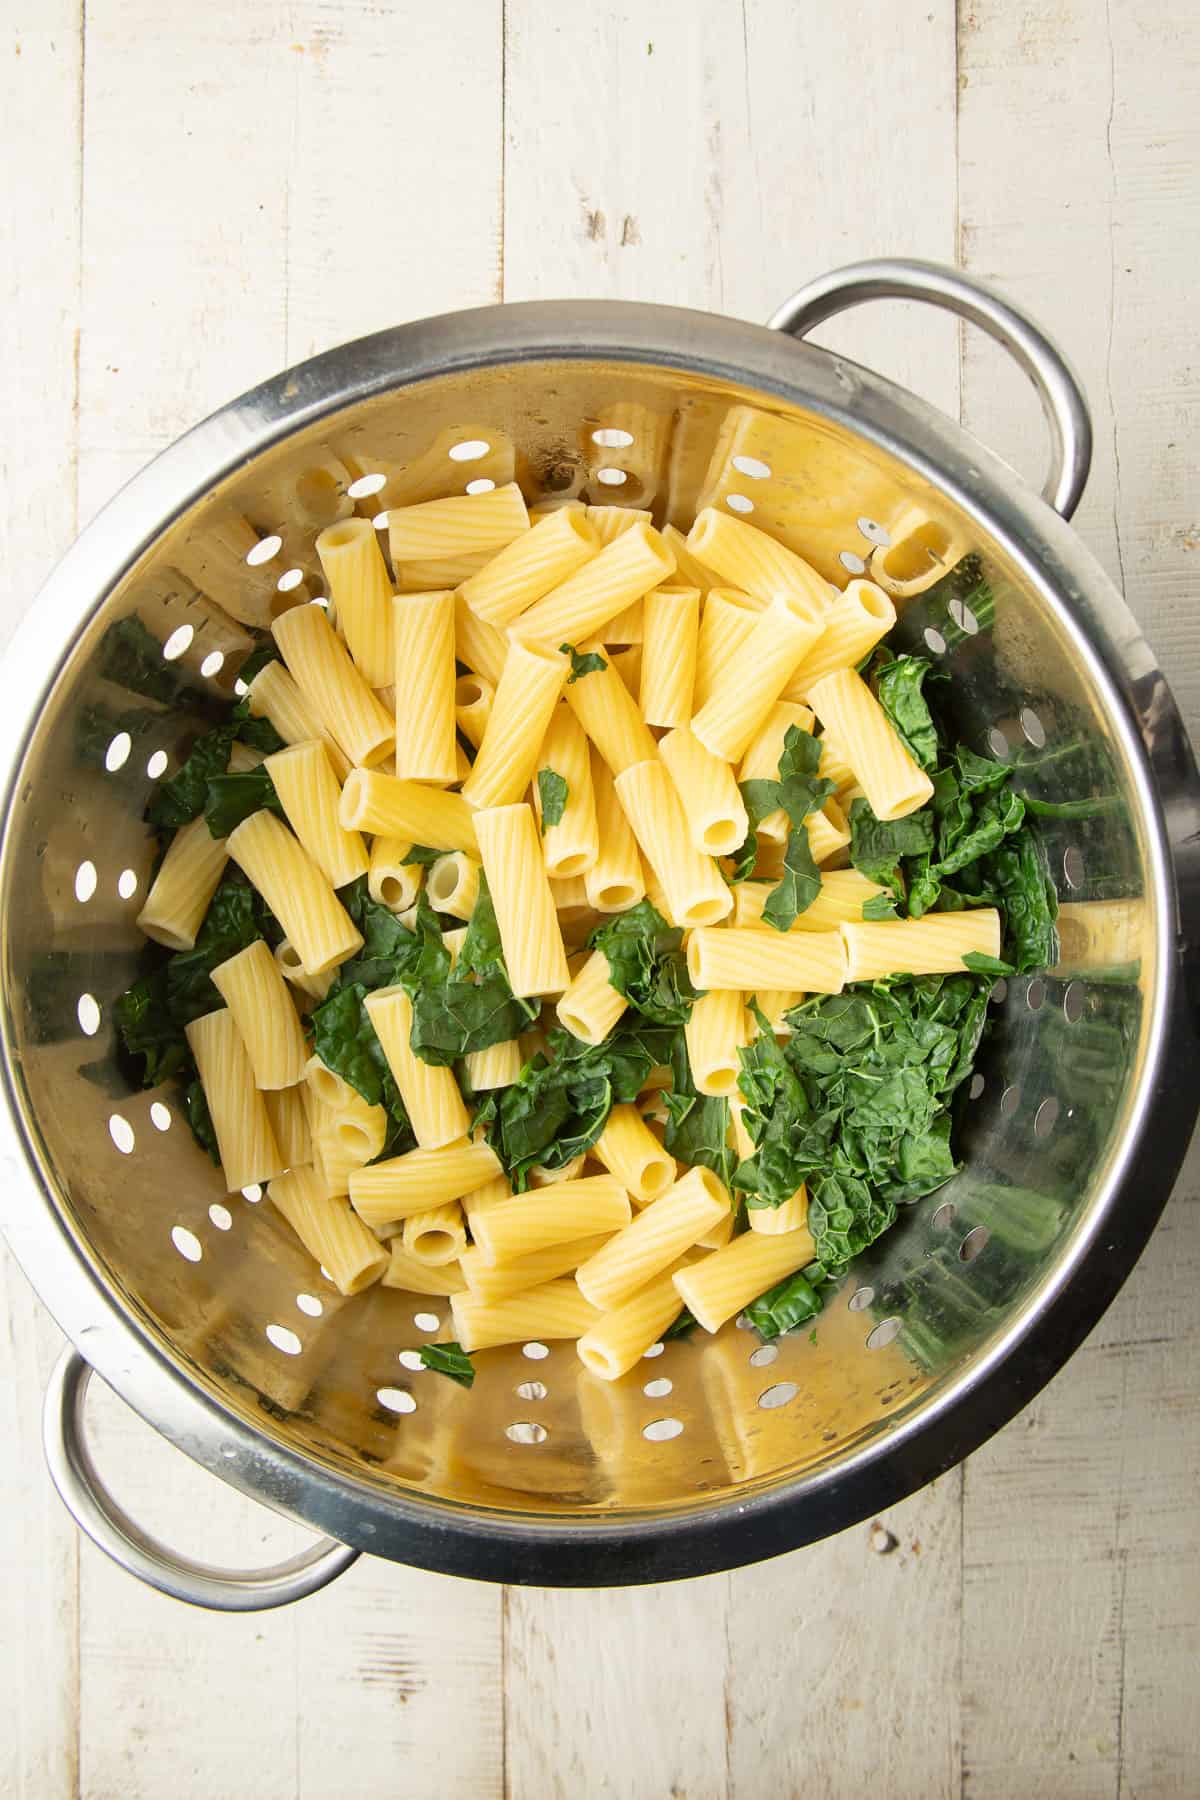 Blanched kale and cooked rigatoni pasta in a colander.